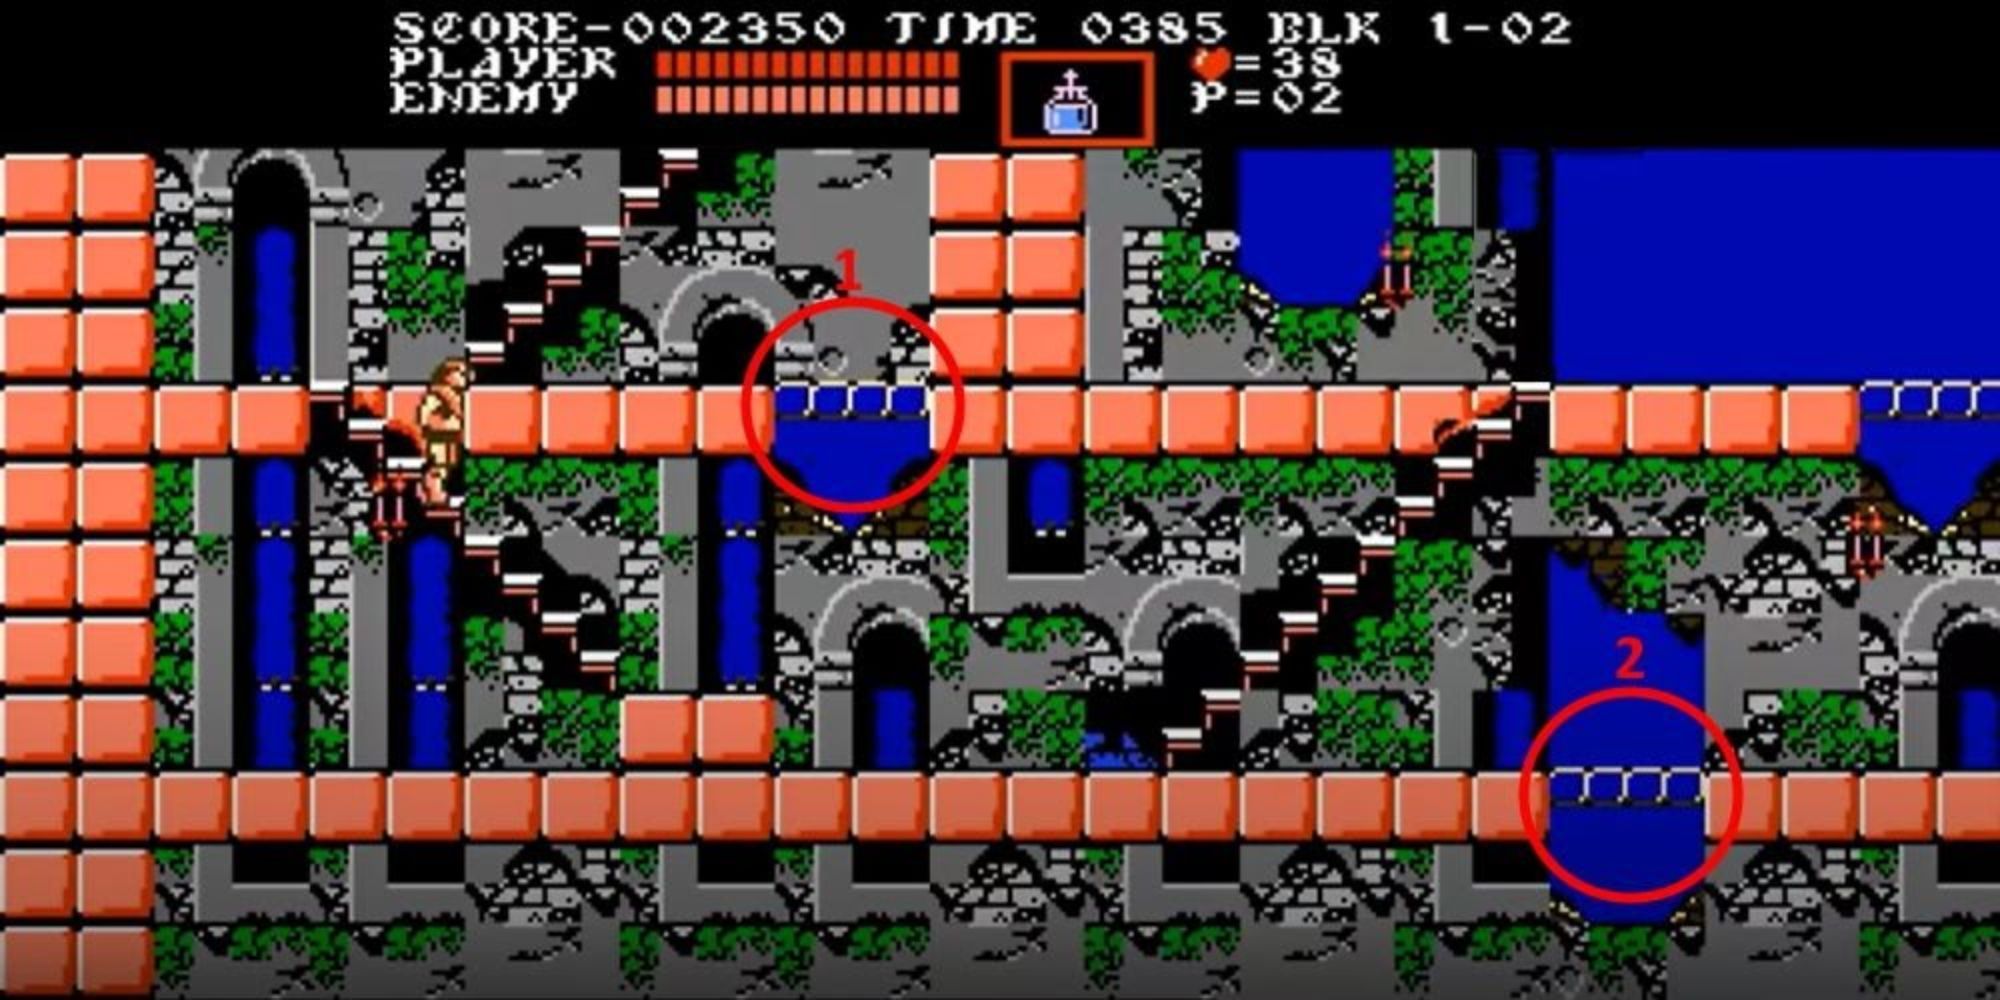 Castlevania, attempting to show that the first flipping floor tile will not result in death, while the second will